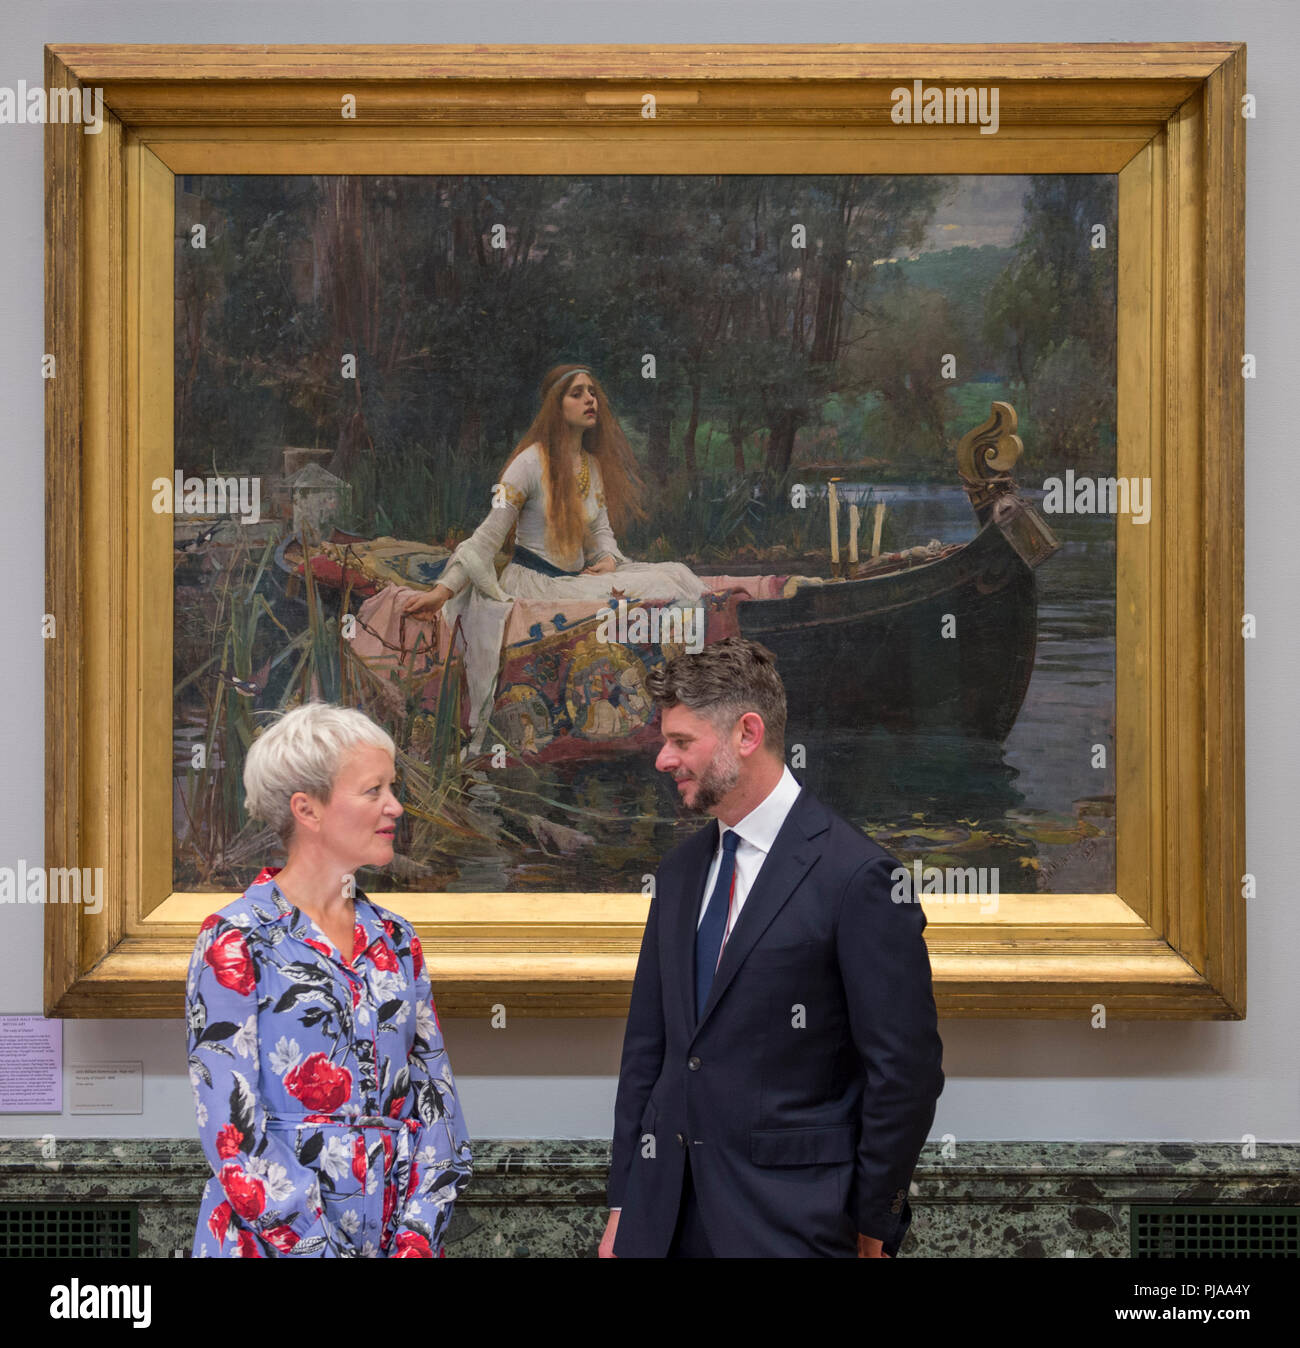 Tate Britain, London, UK. 5 September, 2018. The new Director of the National Gallery of Australia, Nick Mitzevich, and Director of Tate, Maria Balshaw, with John William Waterhouse’s The Lady of Shalott 1888 to mark the launch of a major new exhibition at the National Gallery of Australia. Over forty works from Tate Britain’s collection of Pre-Raphaelite art will be loaned to the National Gallery of Australia in December for a major new exhibition. Credit: Malcolm Park/Alamy Live News. Stock Photo